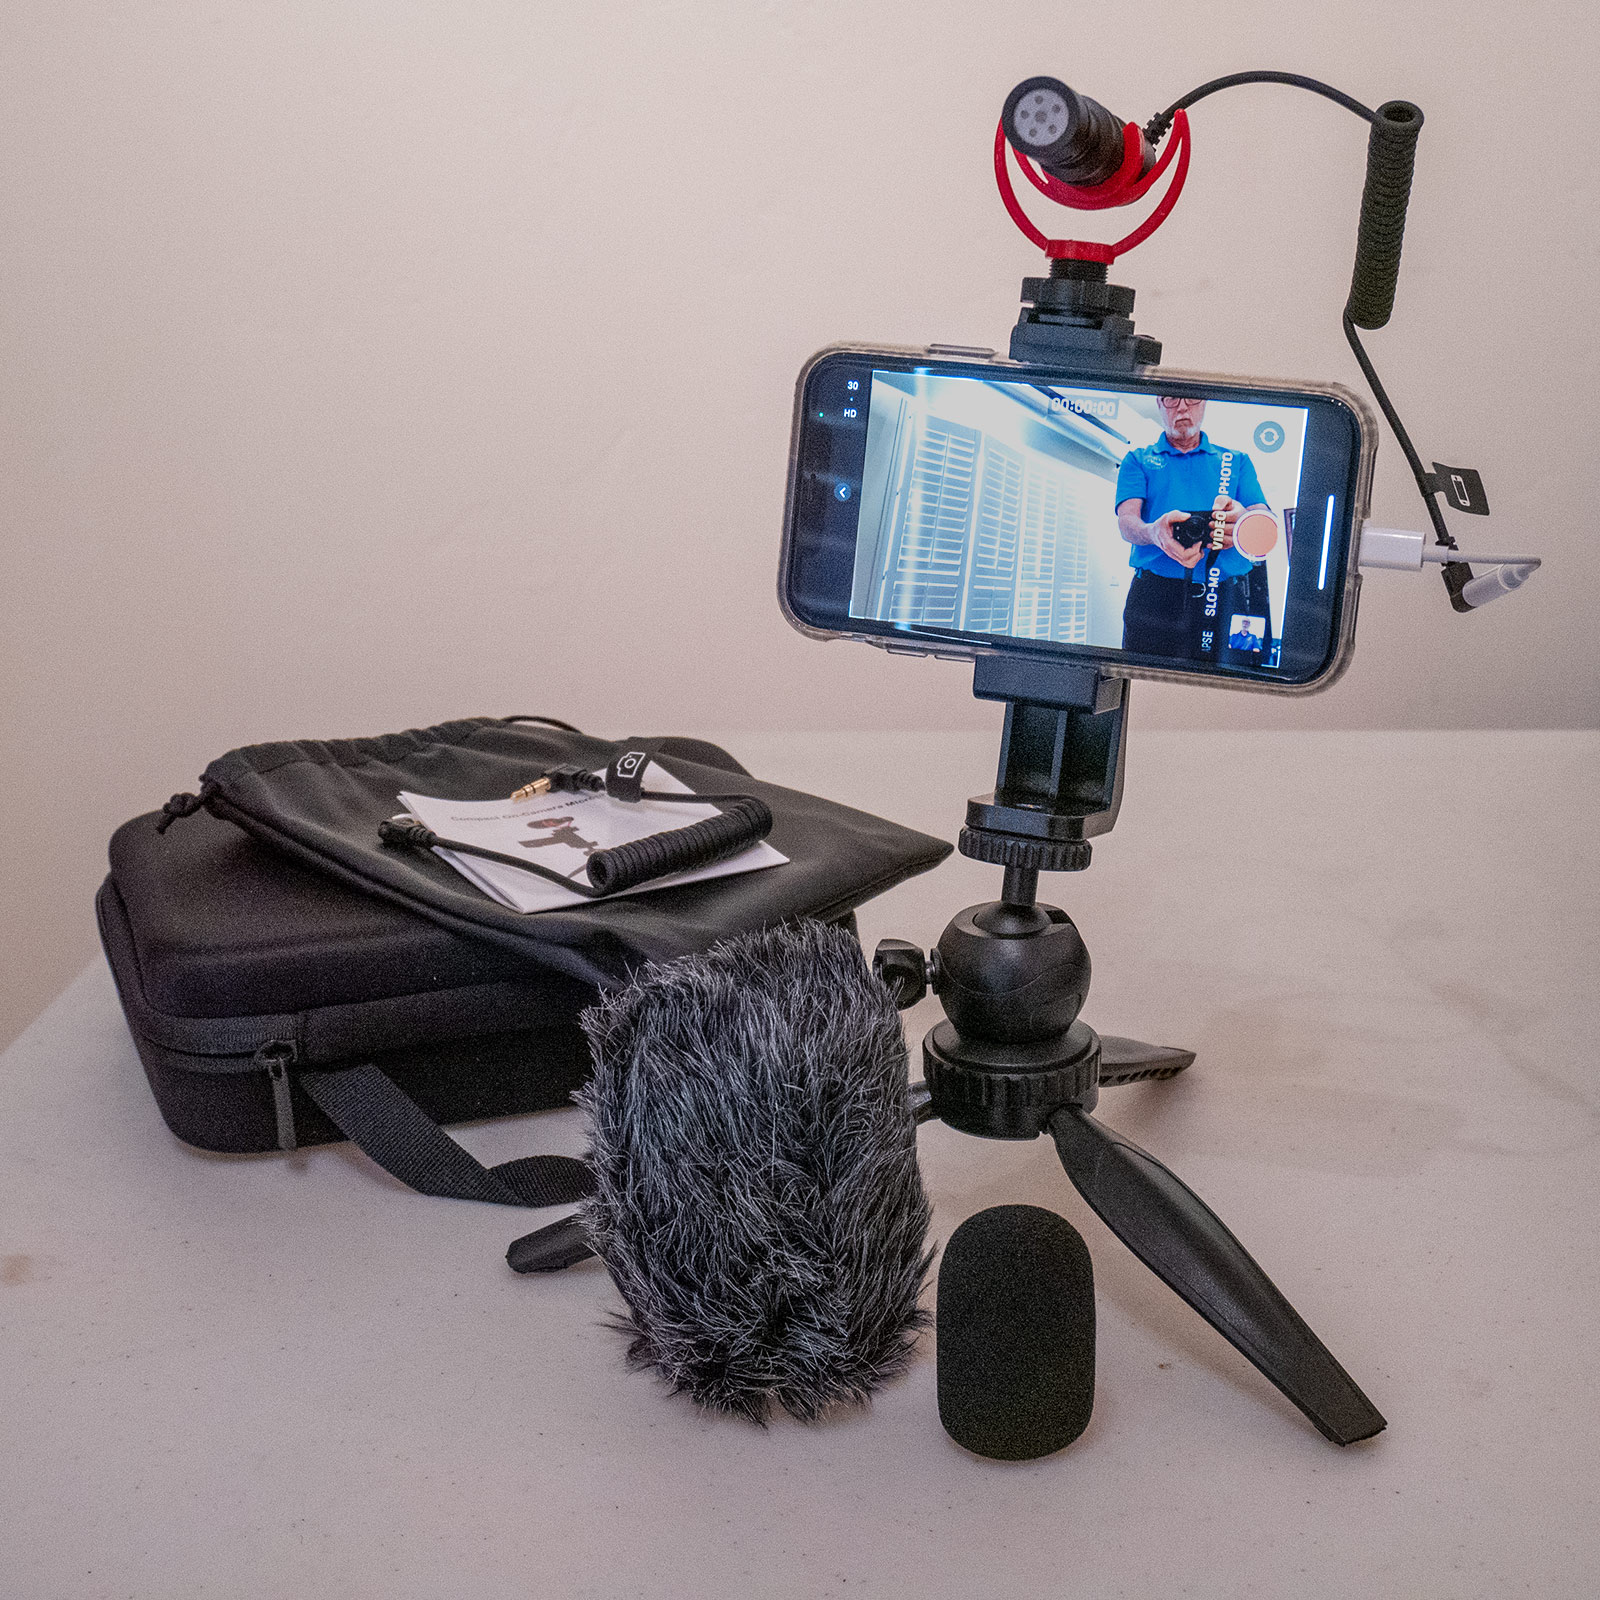 review – universal video microphone kit